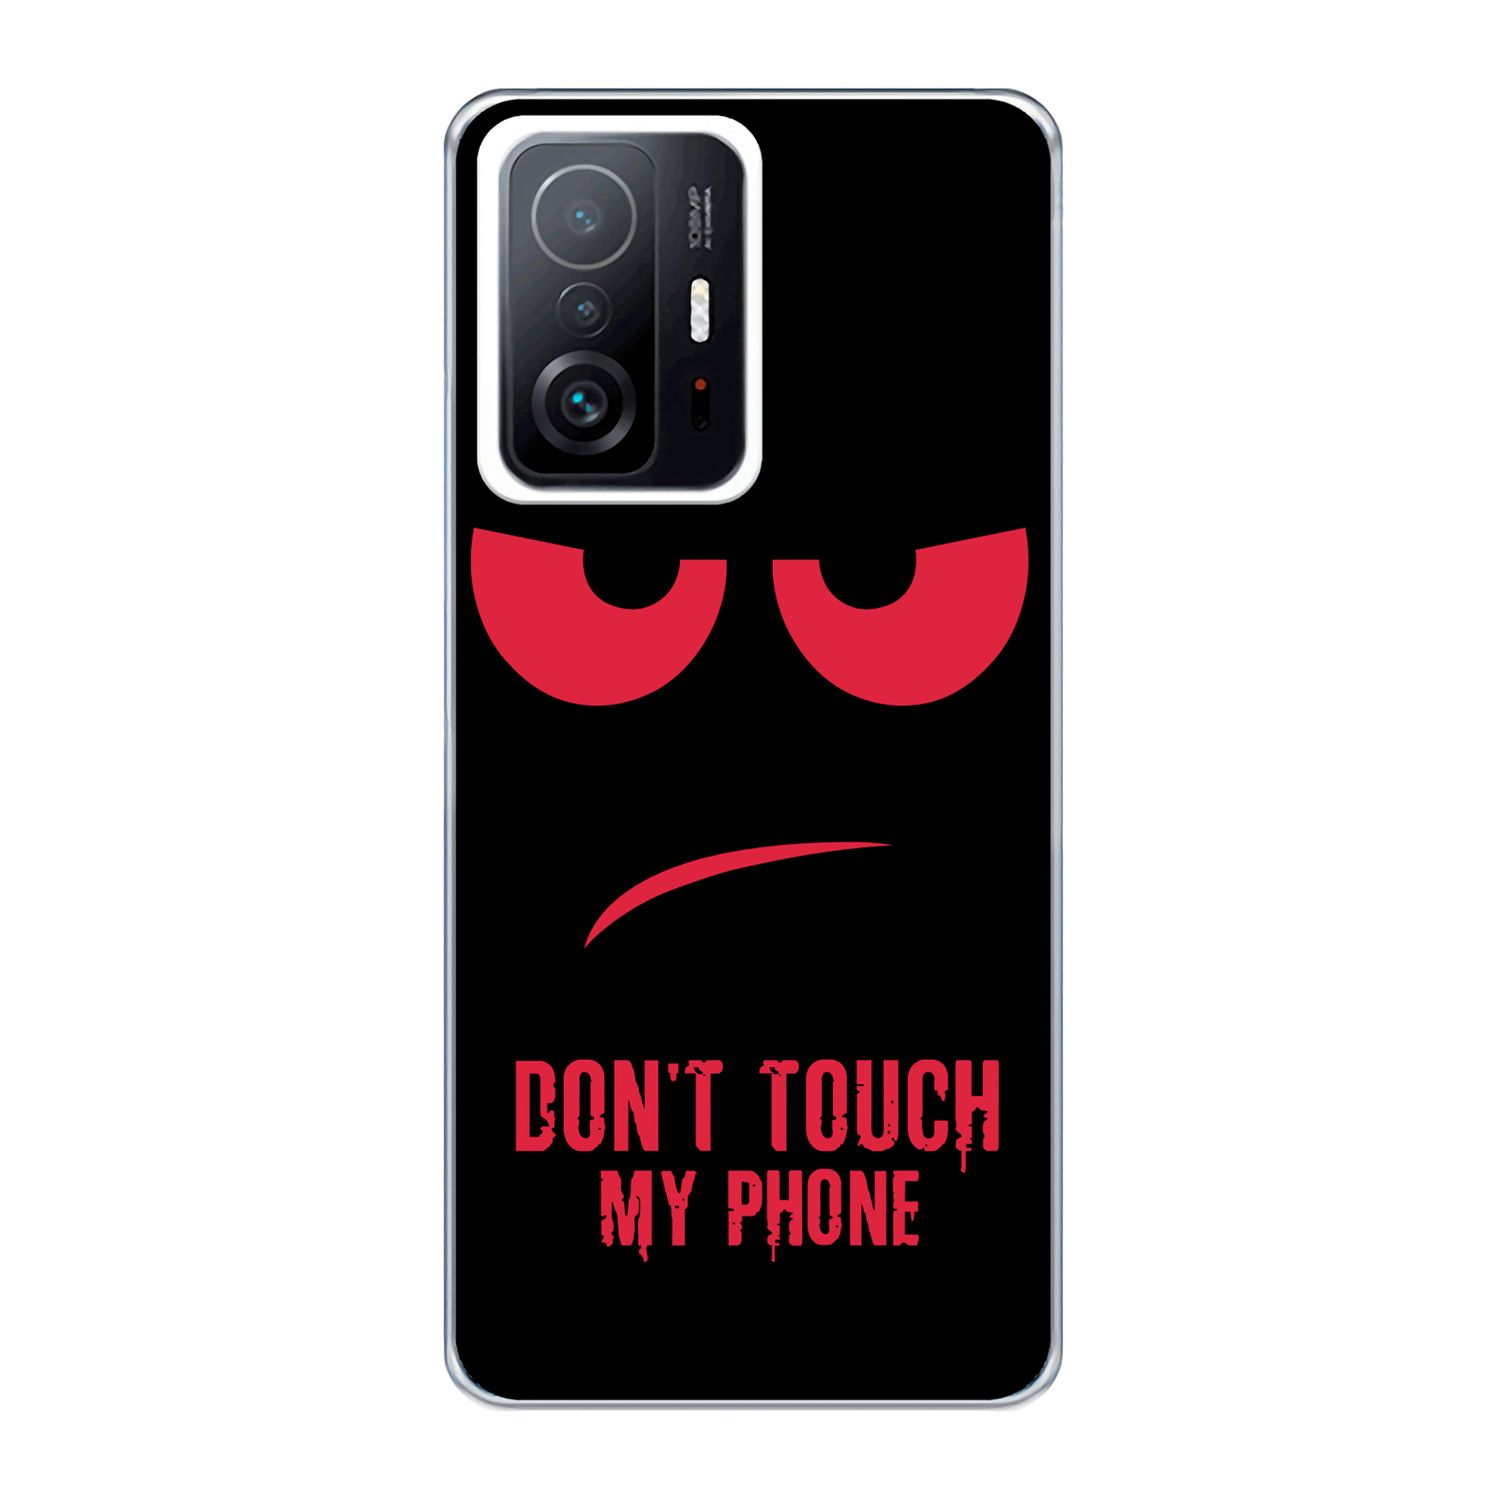 Touch Backcover, Dont My Case, Phone Pro, KÖNIG DESIGN Xiaomi, / Rot 11T 11T Mi